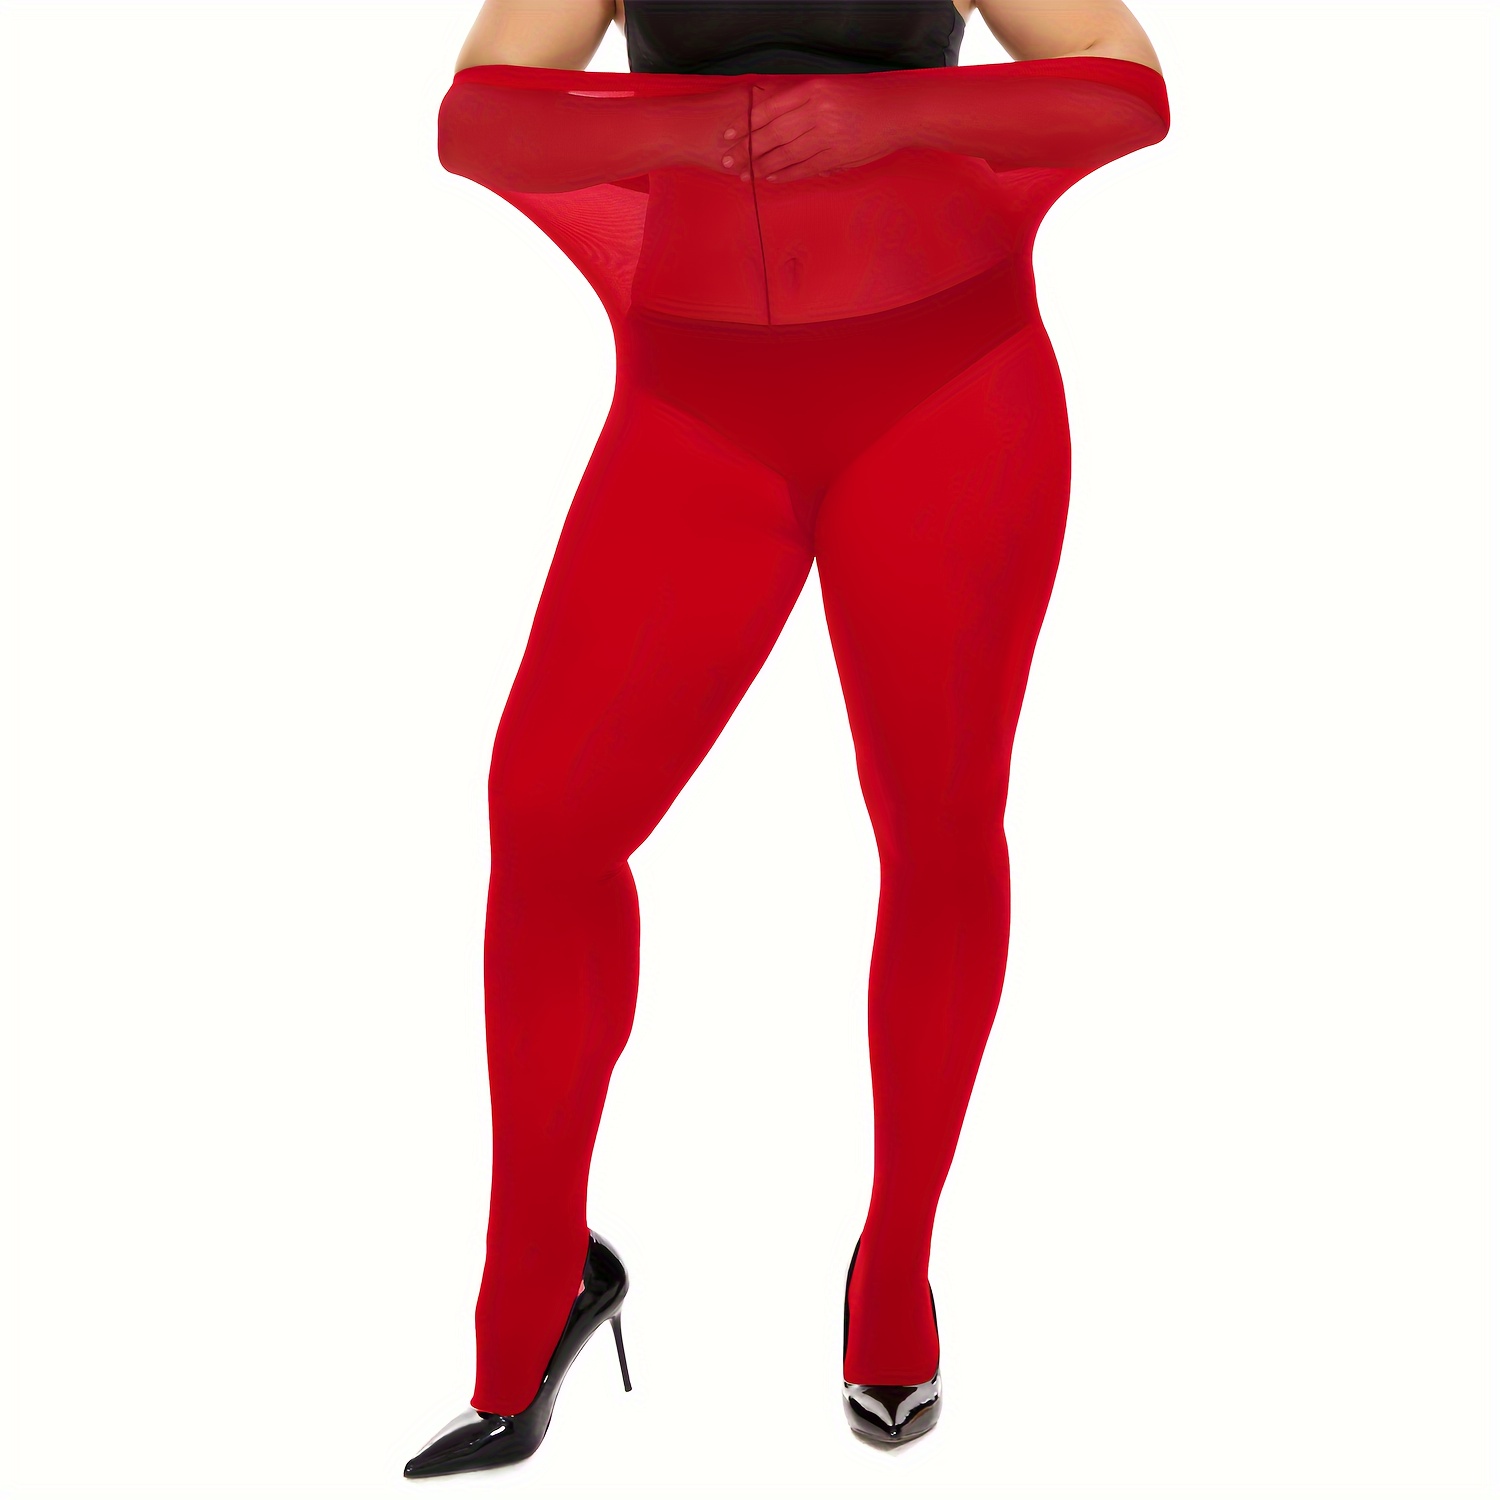 Opaque Tights Plus Size - Comfy Queen Size Tights, Warm Straight Crotch  Leggings, for Chubby Women, Girls